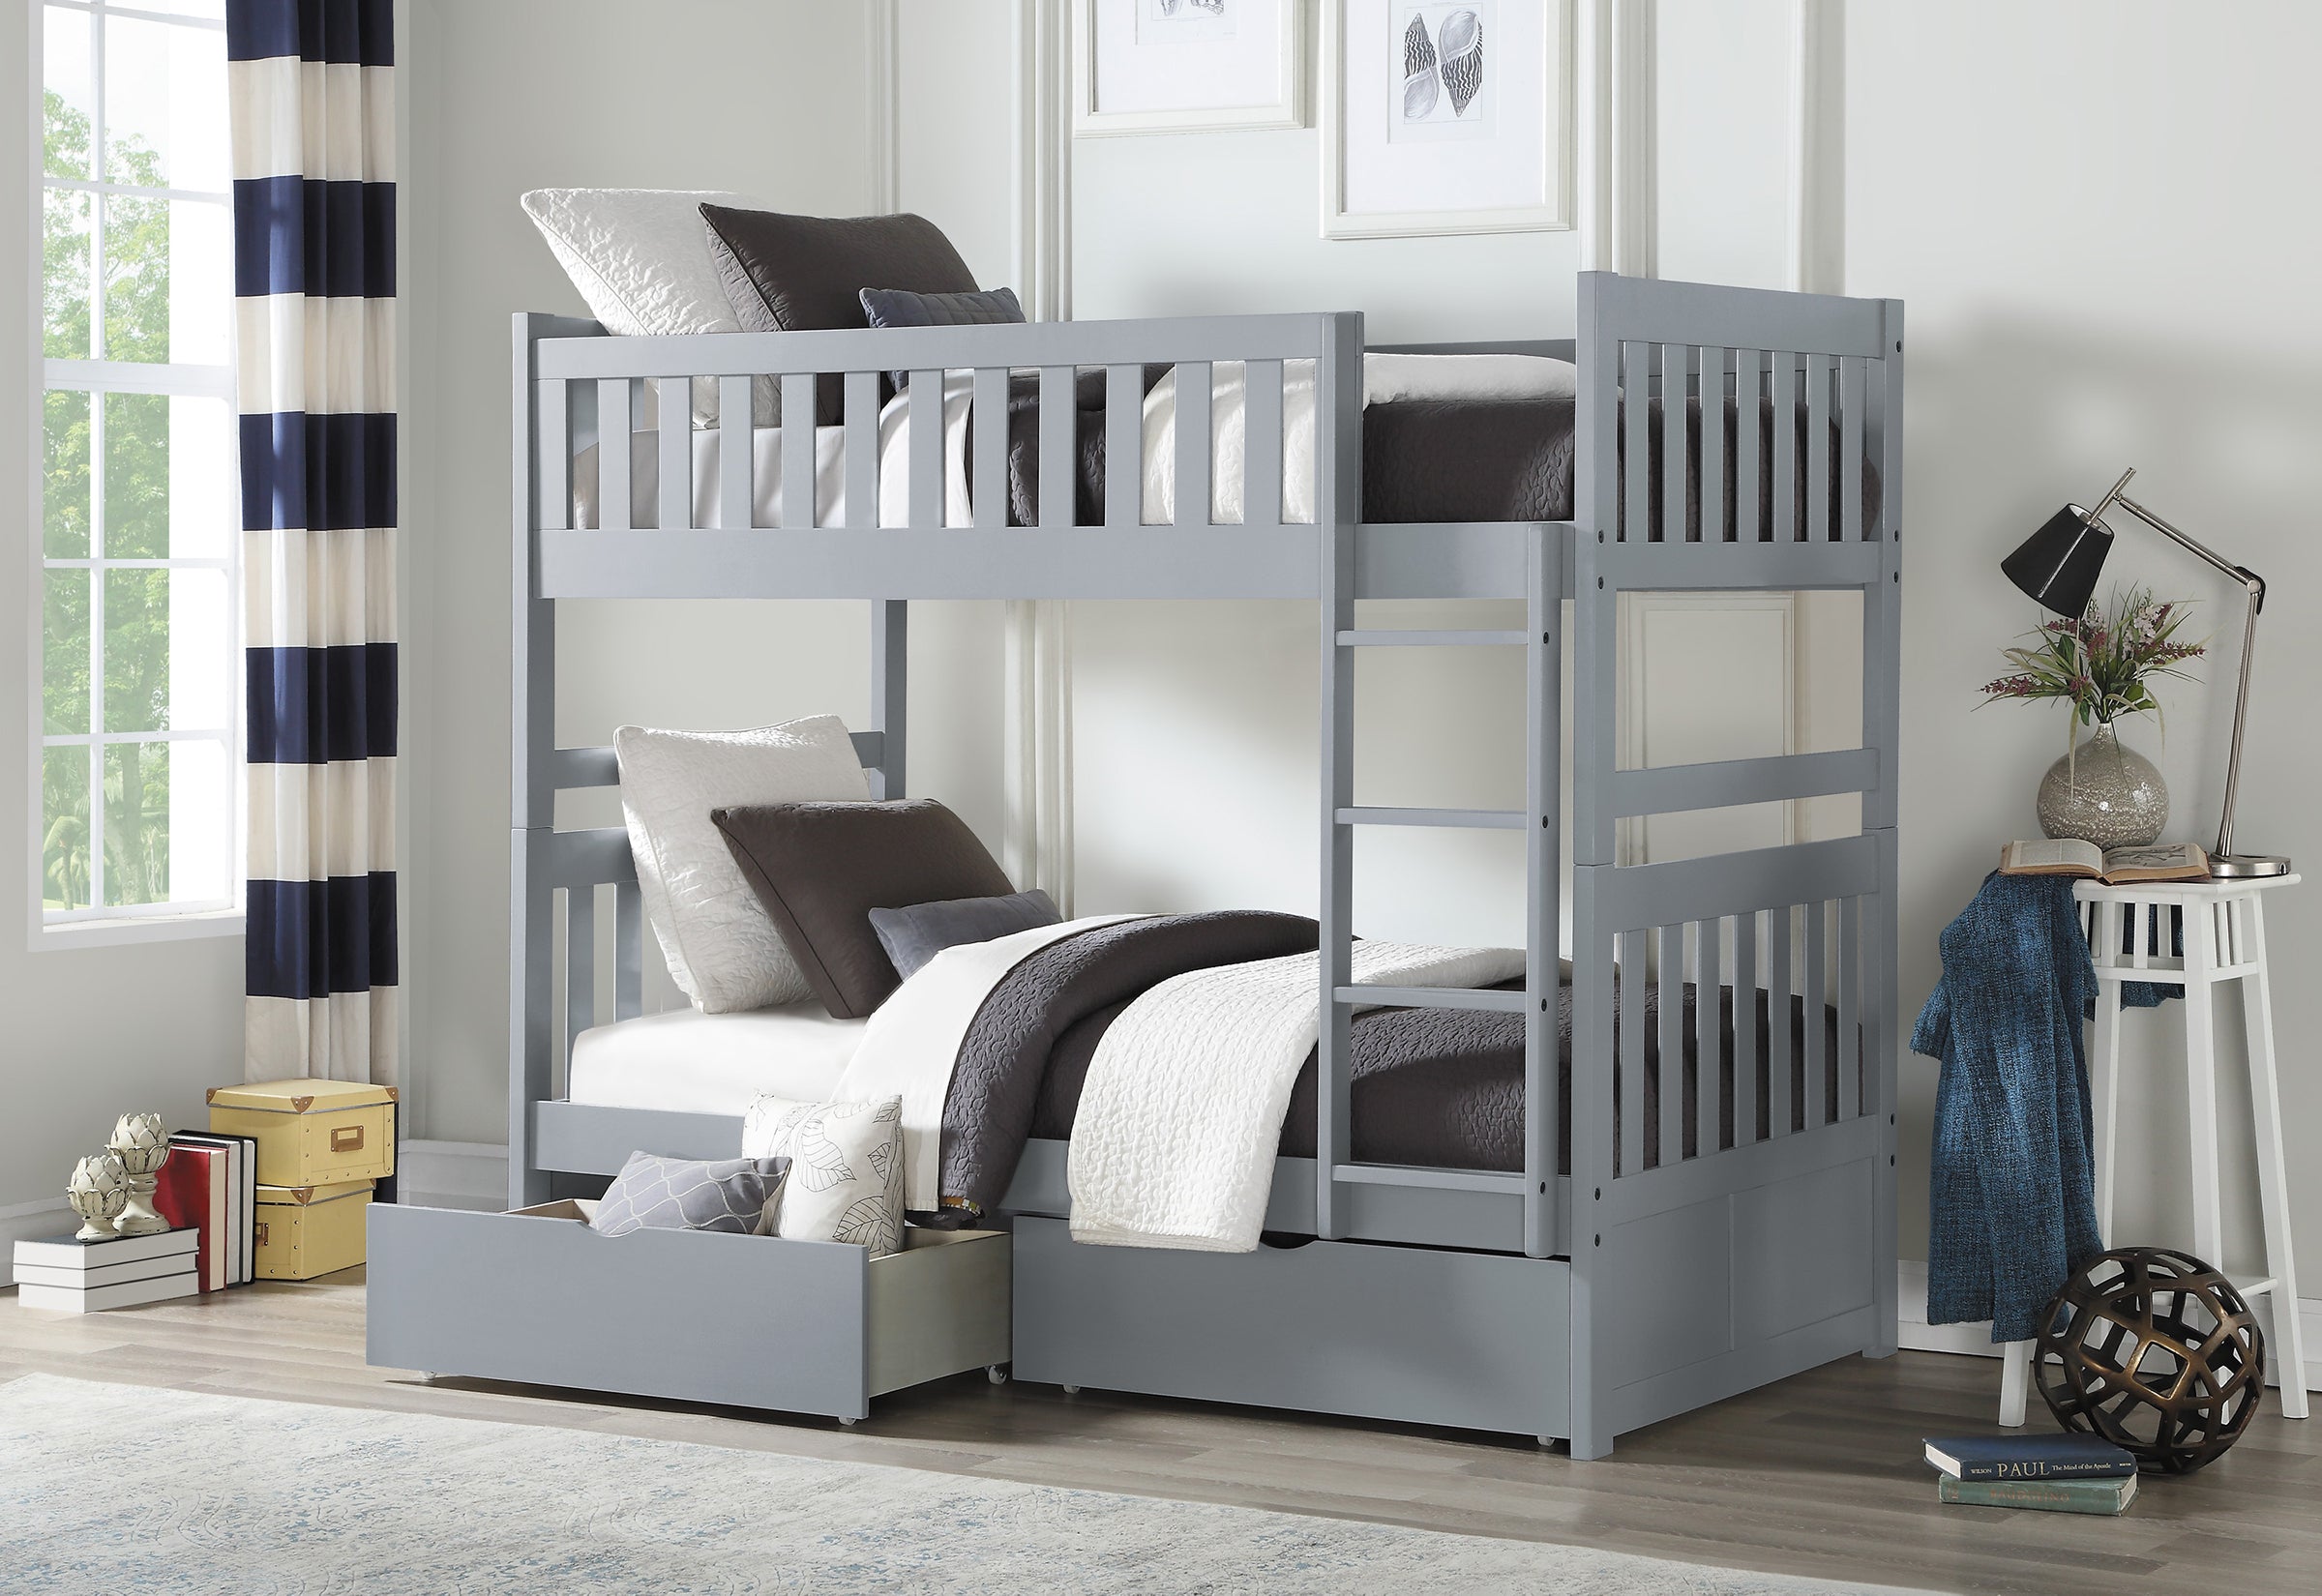 twin bunk beds for kids